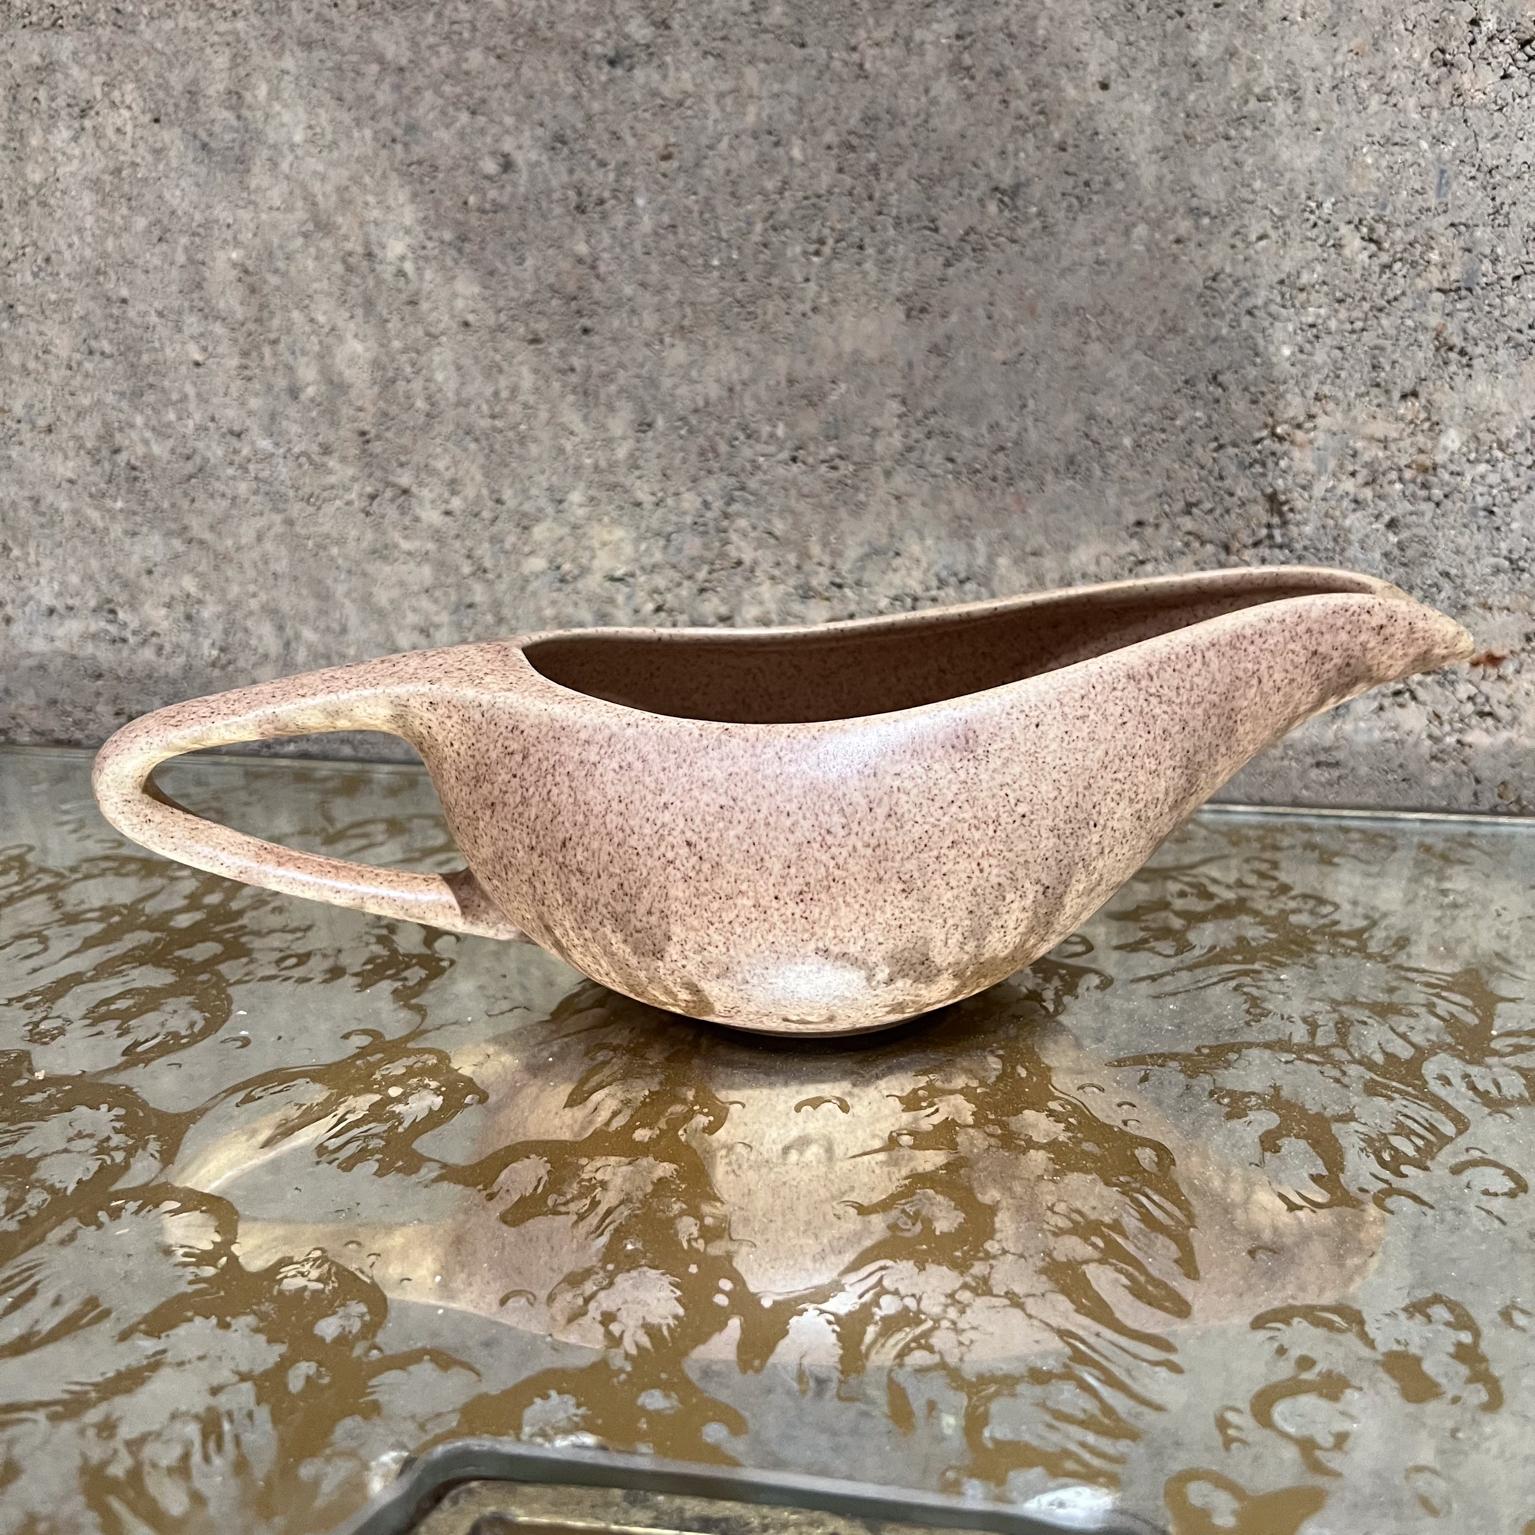 American Modern Ceramic Creamer Pottery Stoneware
MCM USA Calif 1950s after Russel Wright
stamped Laurel of Calif Cerama Stone
3.13 h x 10.25 w x 3.75
Preowned original unrestored vintage.
Review images.